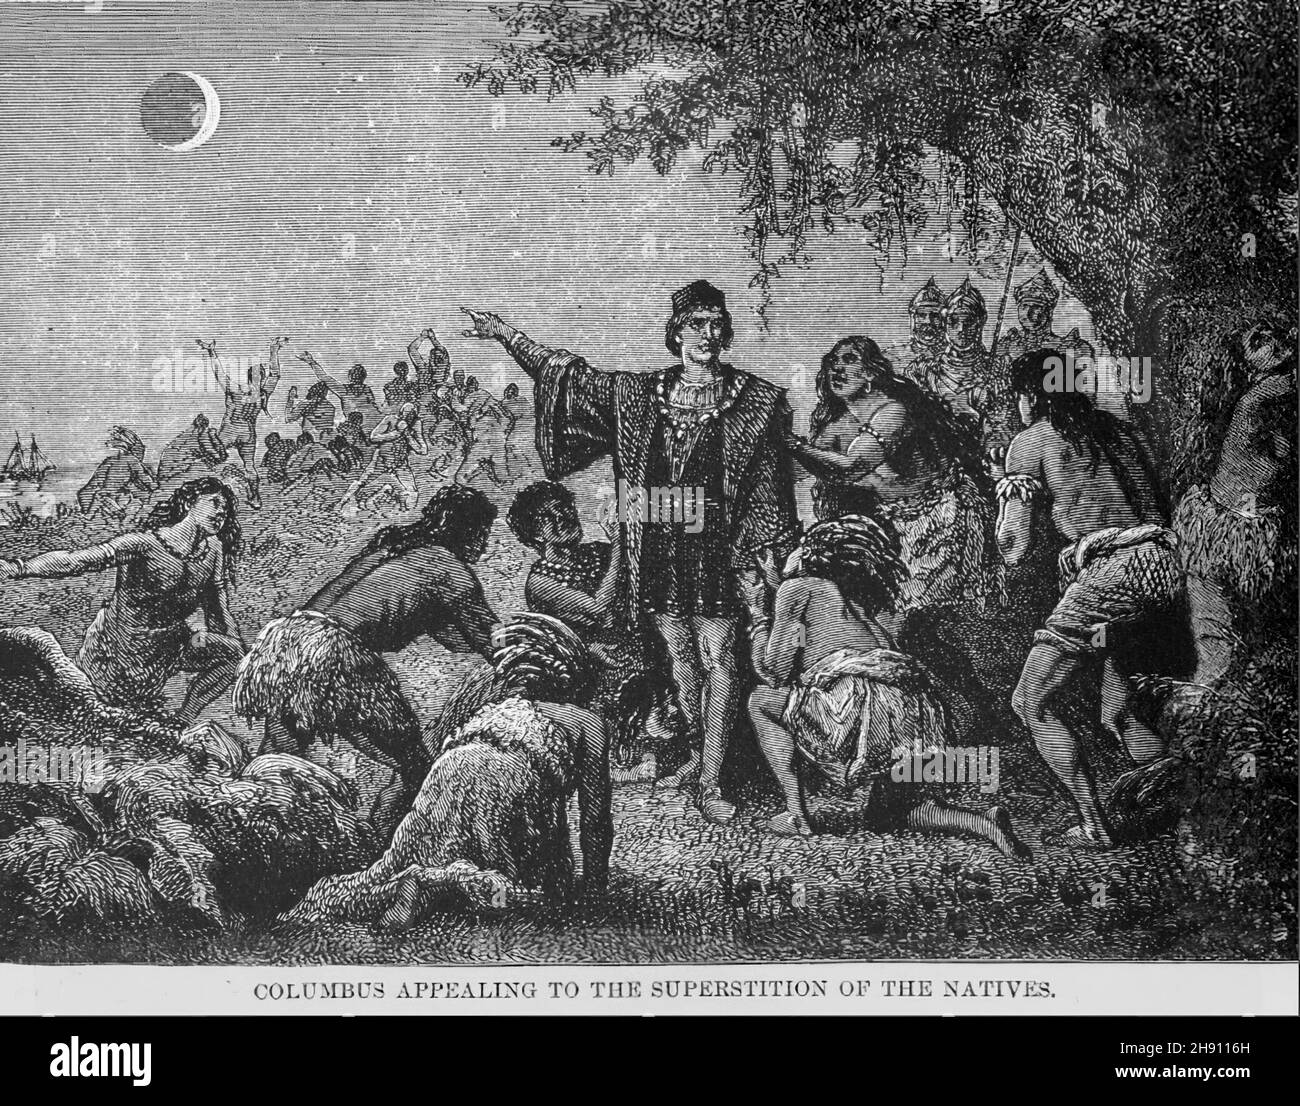 Engraving, Christopher Columbus appealing to the superstition of the Natives. Total eclipse of the Moon on the Antilles on February 29, 1504 CE. Stock Photo